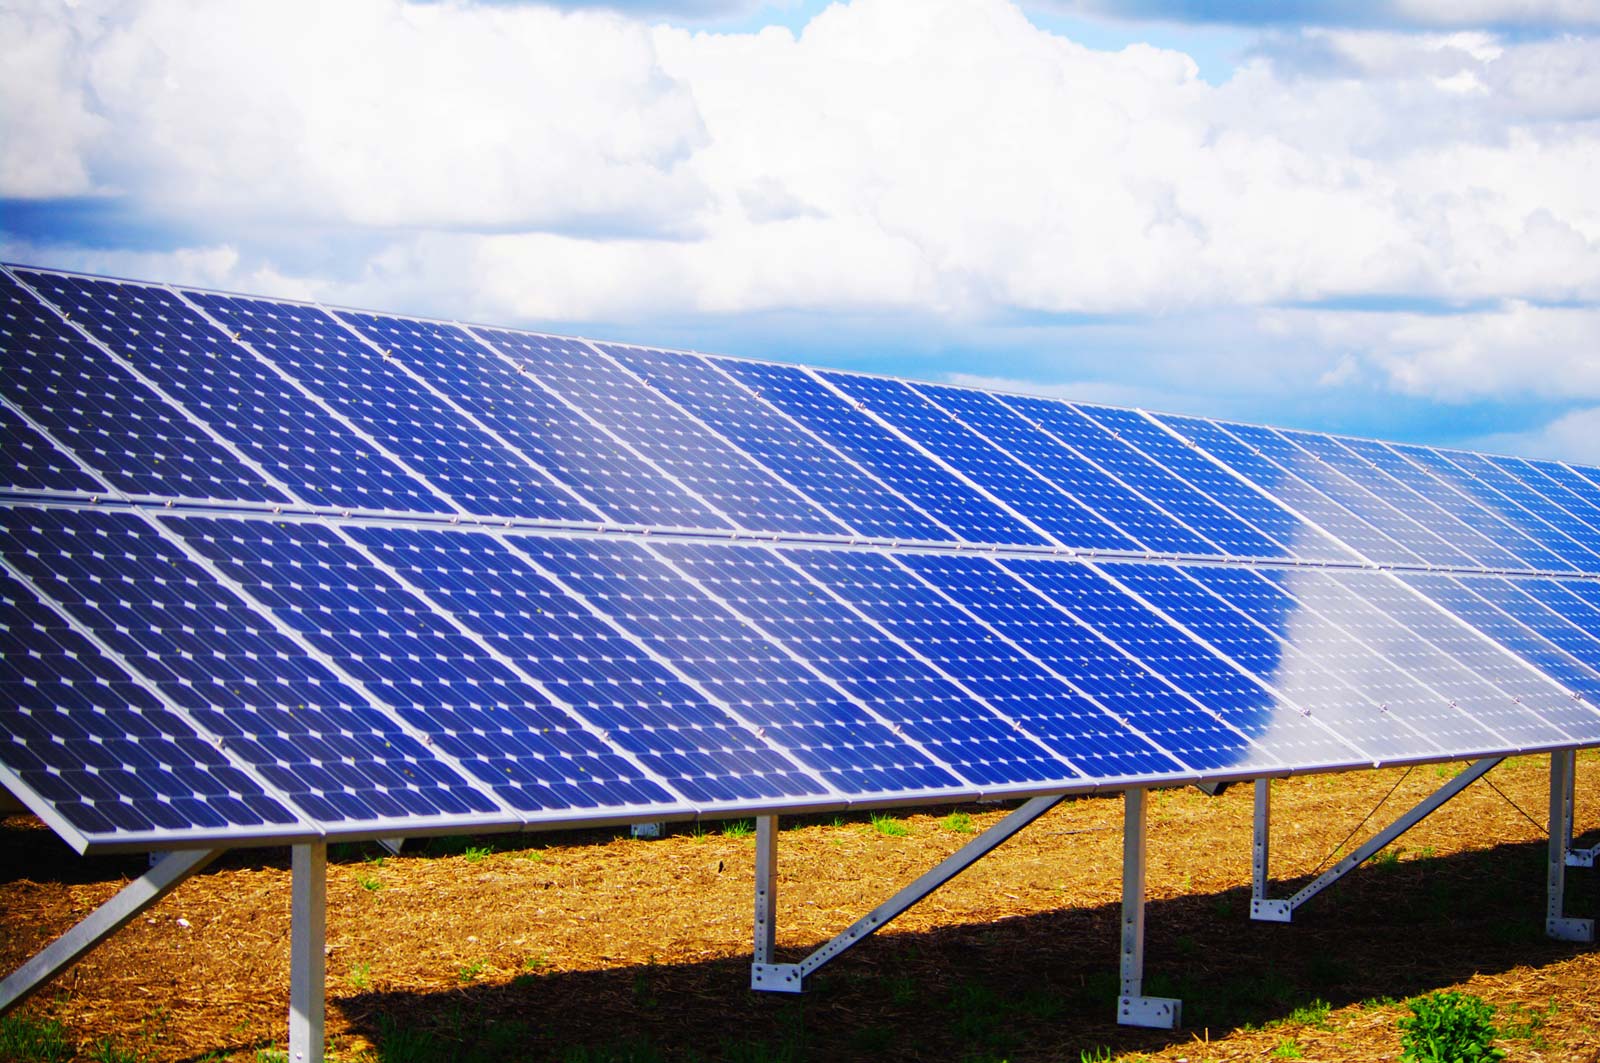 West African C&I solar power provider expands into East Africa